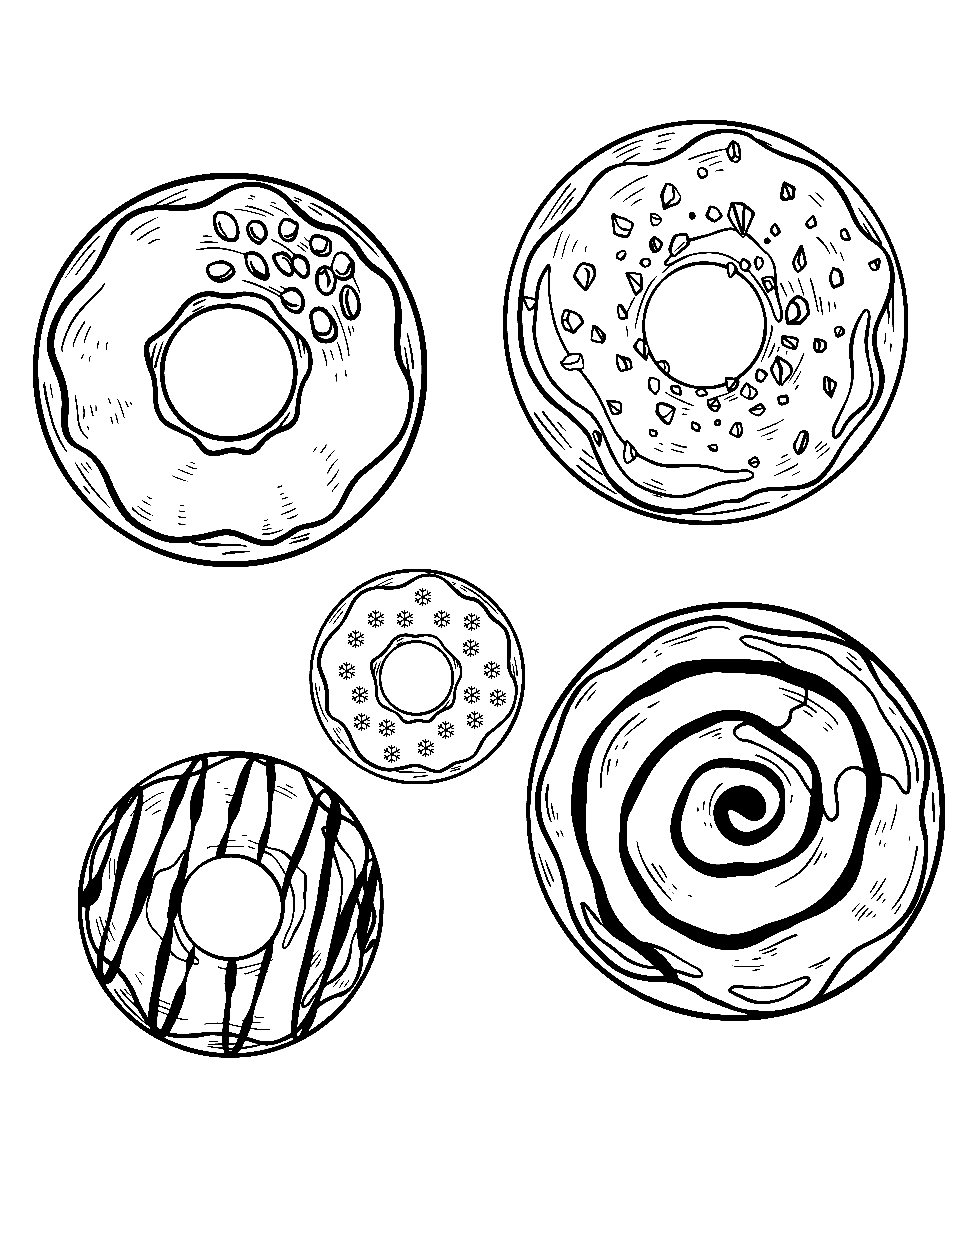 Doodle Donut Adventure Coloring Page - A page filled with various donut doodles, each with unique patterns.